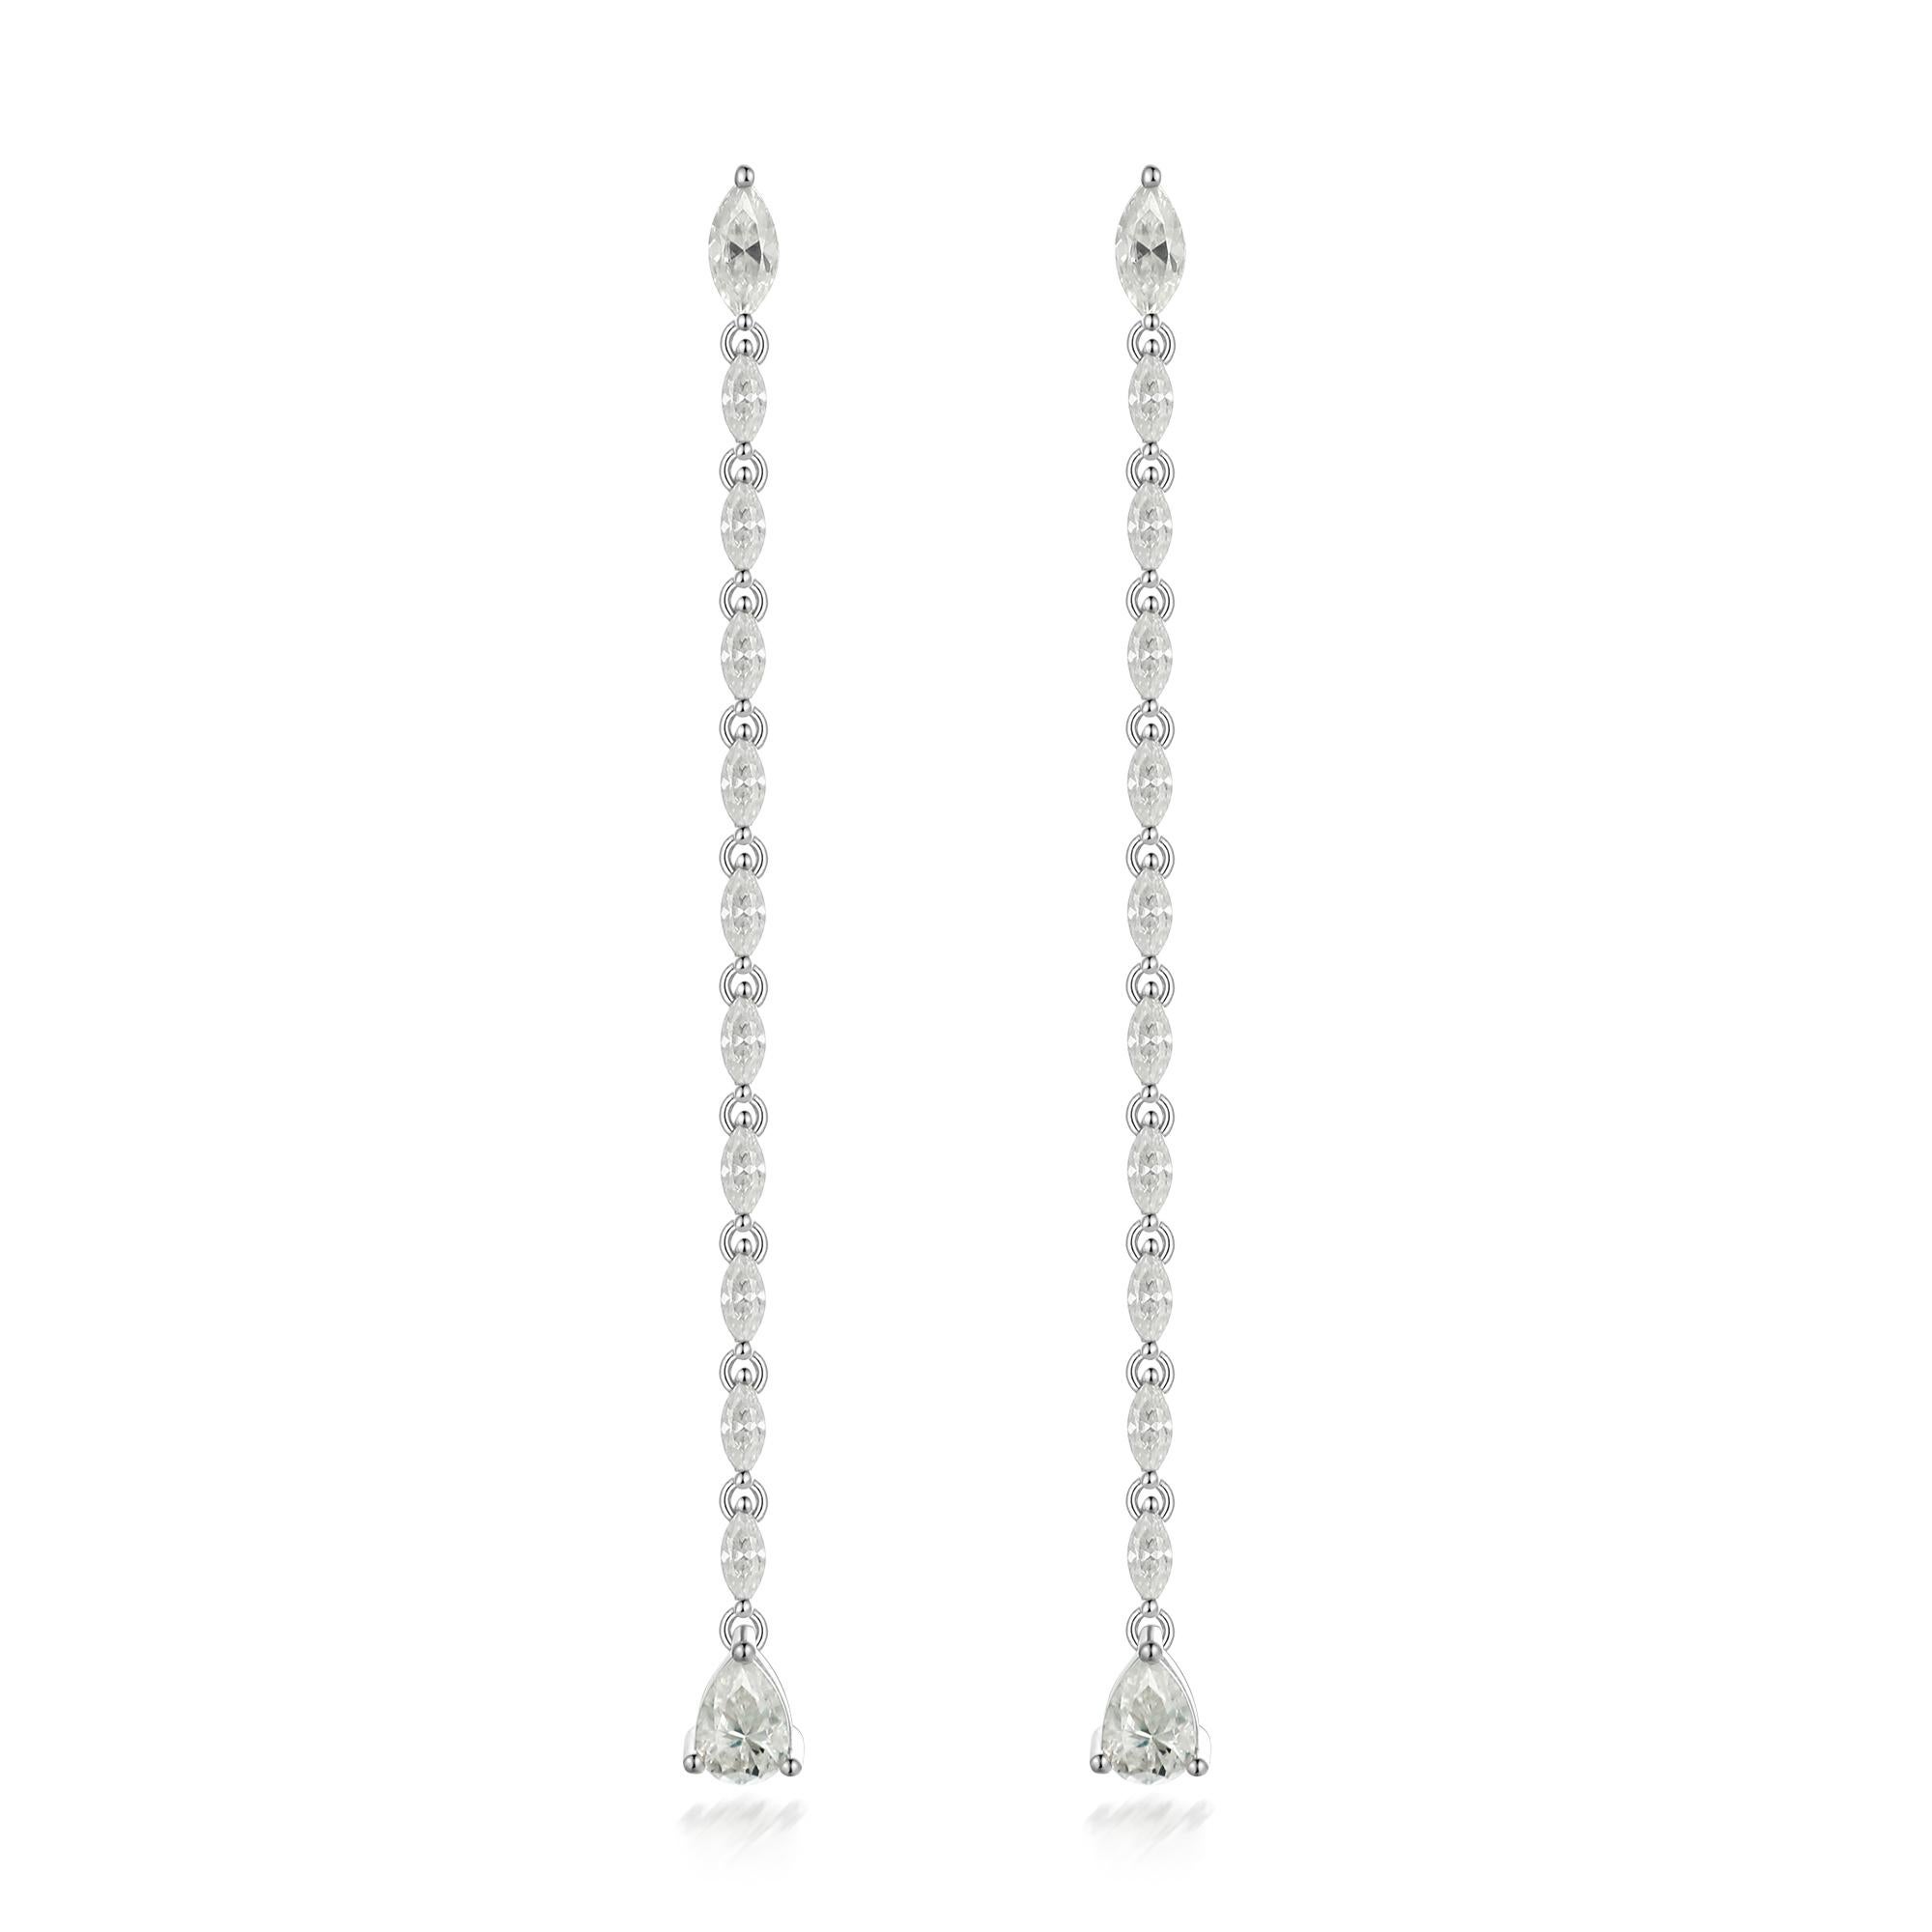 Earring Information
Diamond Type : Natural Diamond
Metal : 14k Gold
Metal Color : White Gold
Stone Type : Pear Diamond, Marquise Diamond

 
Elegant and eye-catching, these drop earrings in 14K white gold are a stylish take on the classic diamond